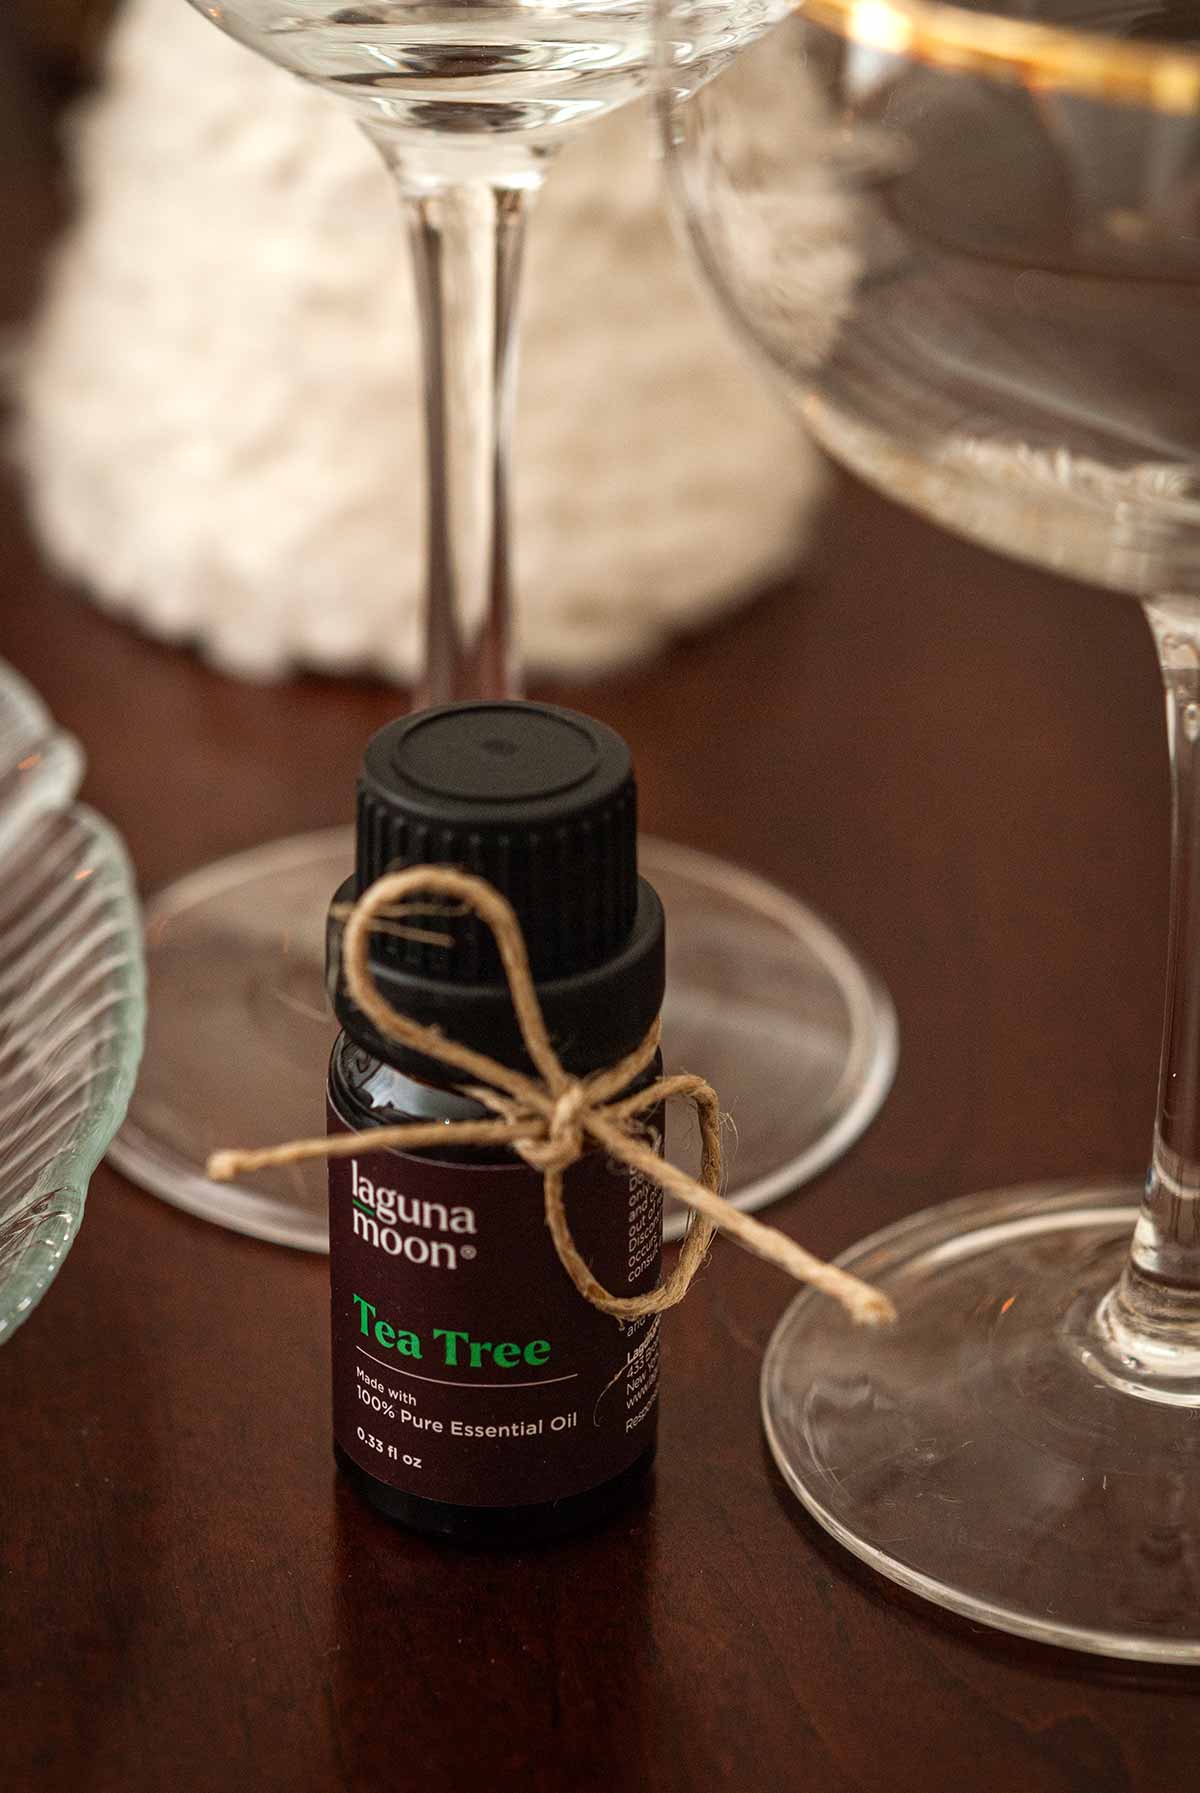 A small bottle of tee tree oil tied with a little string on a table i front of glassware.